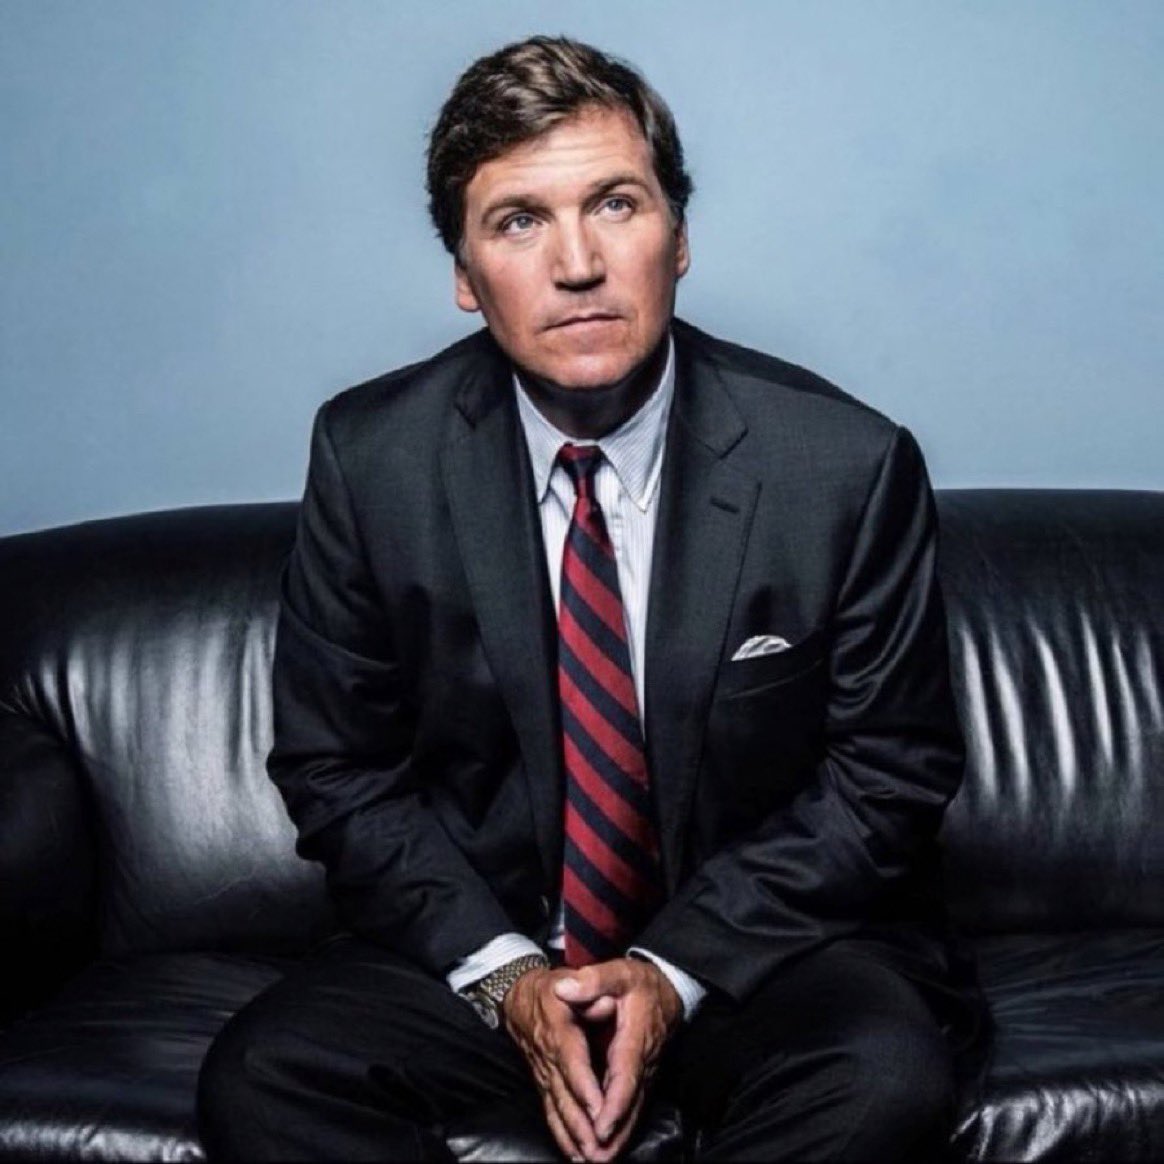 Do you trust Tucker Carlson more than the Media?

Yes or No